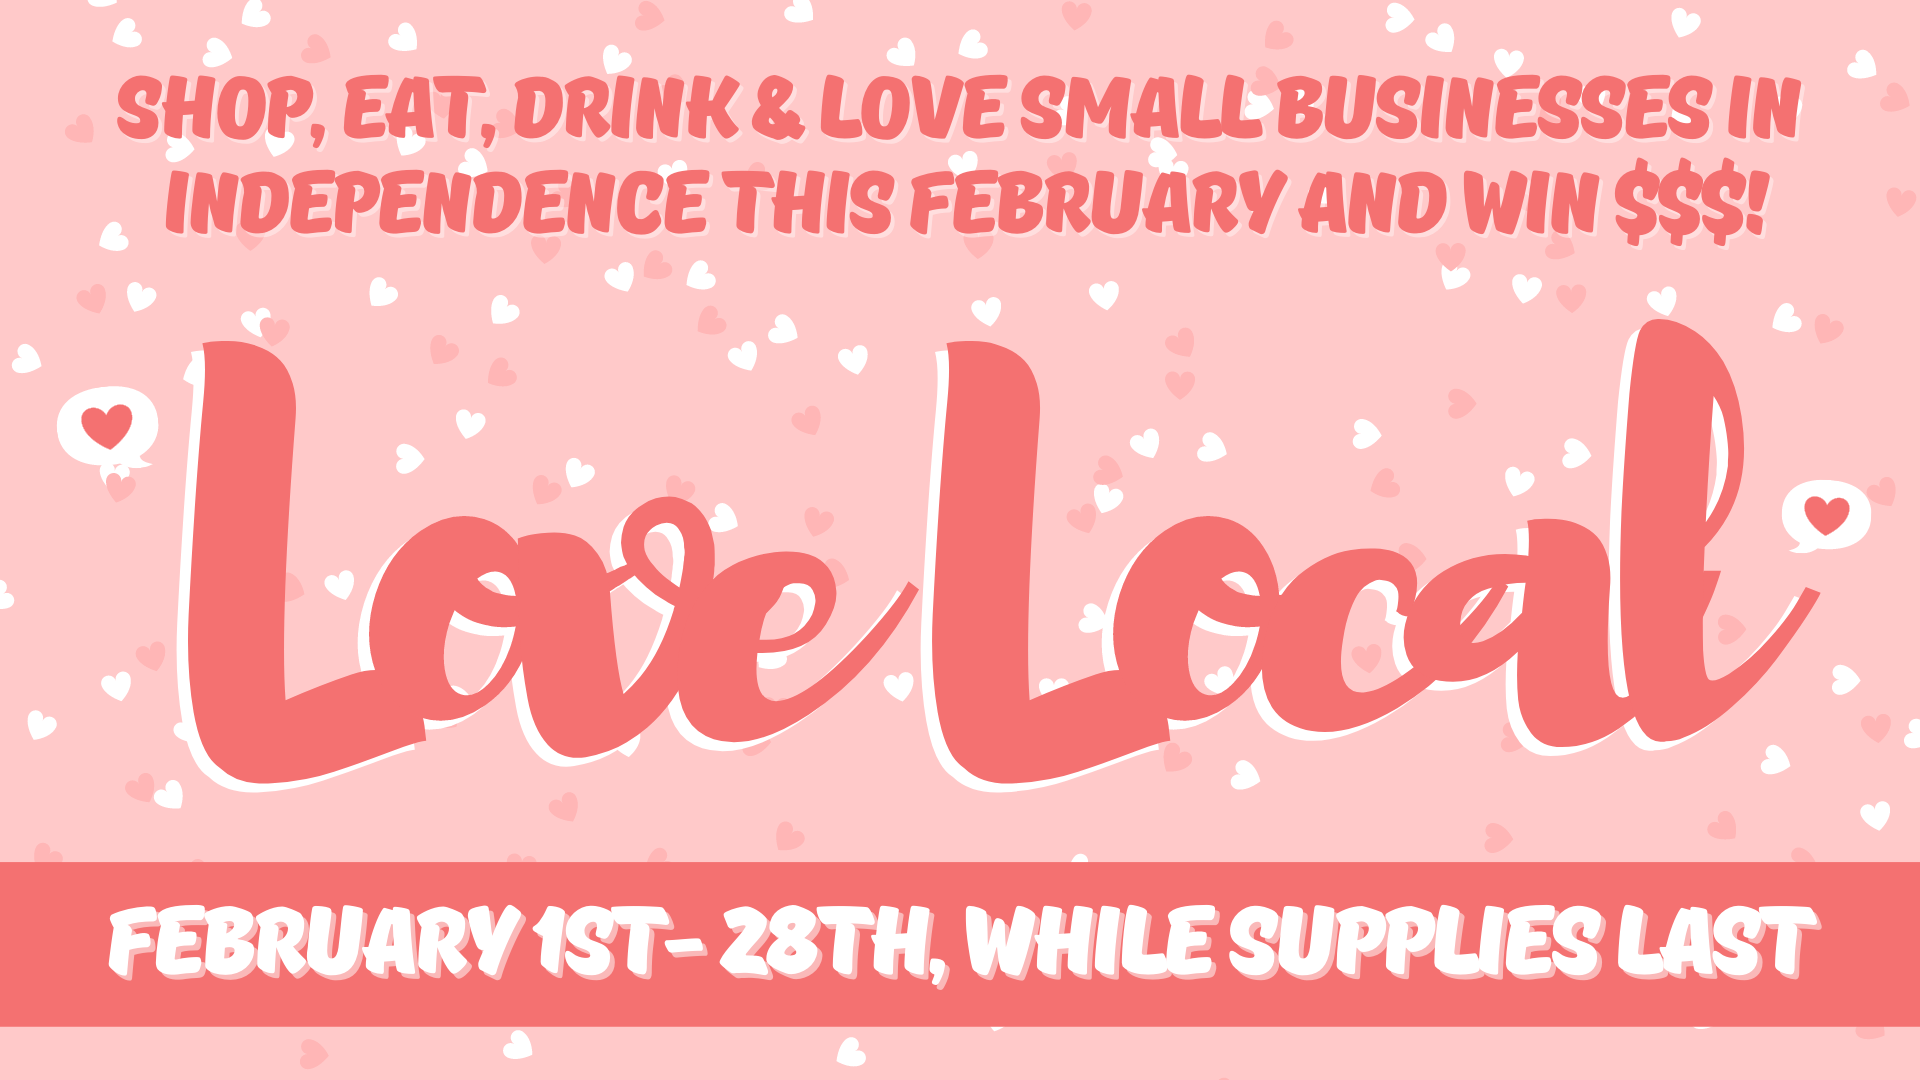 Love Local Scratch-its are back this February in Independence Oregon!